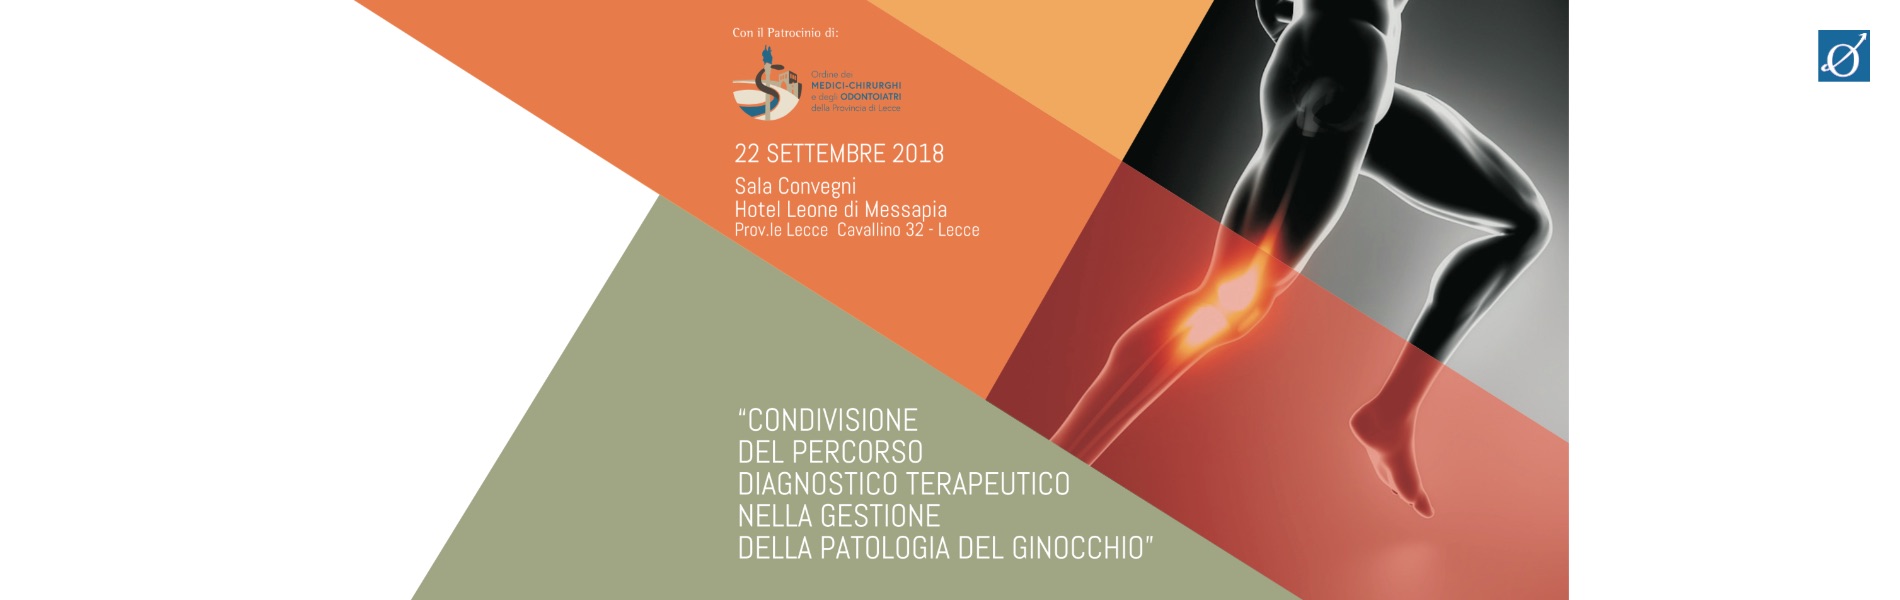 https://www.formedica.it/wp/wp-content/uploads/2018/07/Lecce_2018_09_22_sito_LOW.jpg